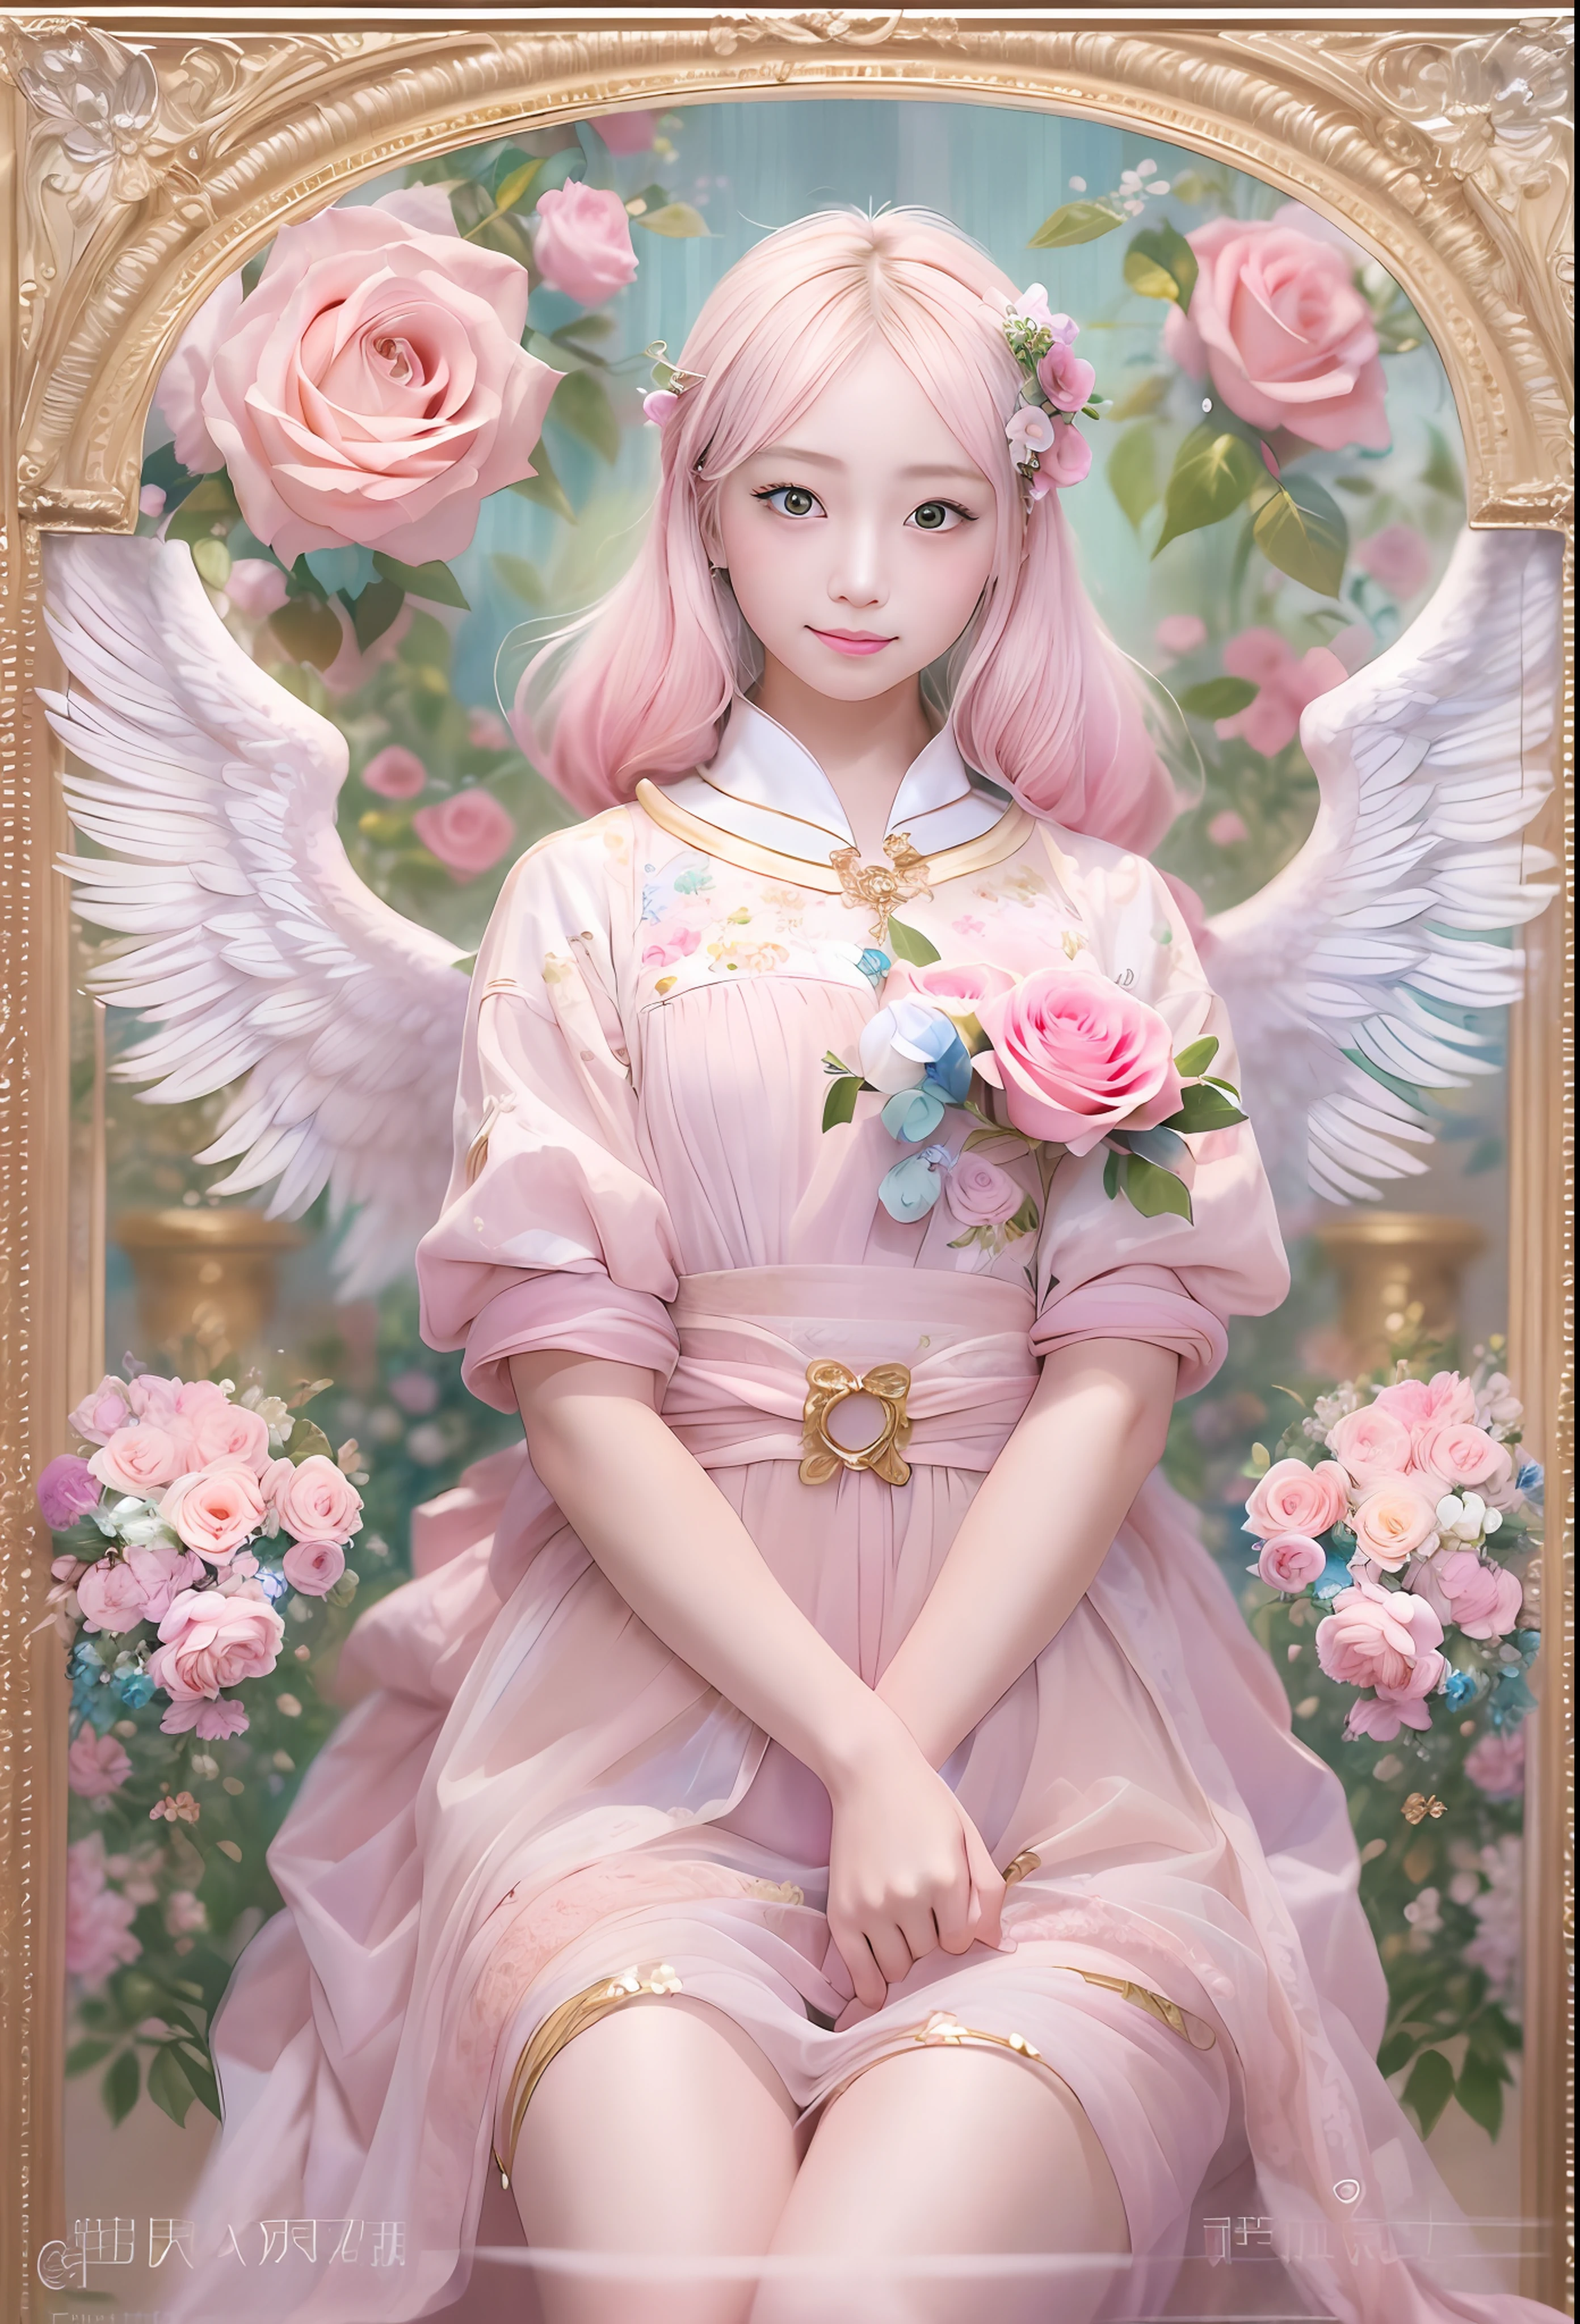 Puppy Kawaii、Pale pink color illustration、(Angel wings、😇、a smile、😌🥰Archaic Smile).hyper realstic、Ultra-realistic、Depiction of the human body without distortion、Monna Lisa、Woman in the Arms、Near and far law、Three-dimensional、Contemporary painting、moderno、world masterpiece、collection、Homage to the art or artist work of Picasso and Renoir, Not sentimental、Excellent portrayal、Gentle expression、More detailed character faces, Serious competition、Compositions like paintings、(Konmutsuki_Gacha_Series 1, punk_rosette), Realistic、Delicate brushwork、aqua color flowers, (Full body, elegant flowers background)